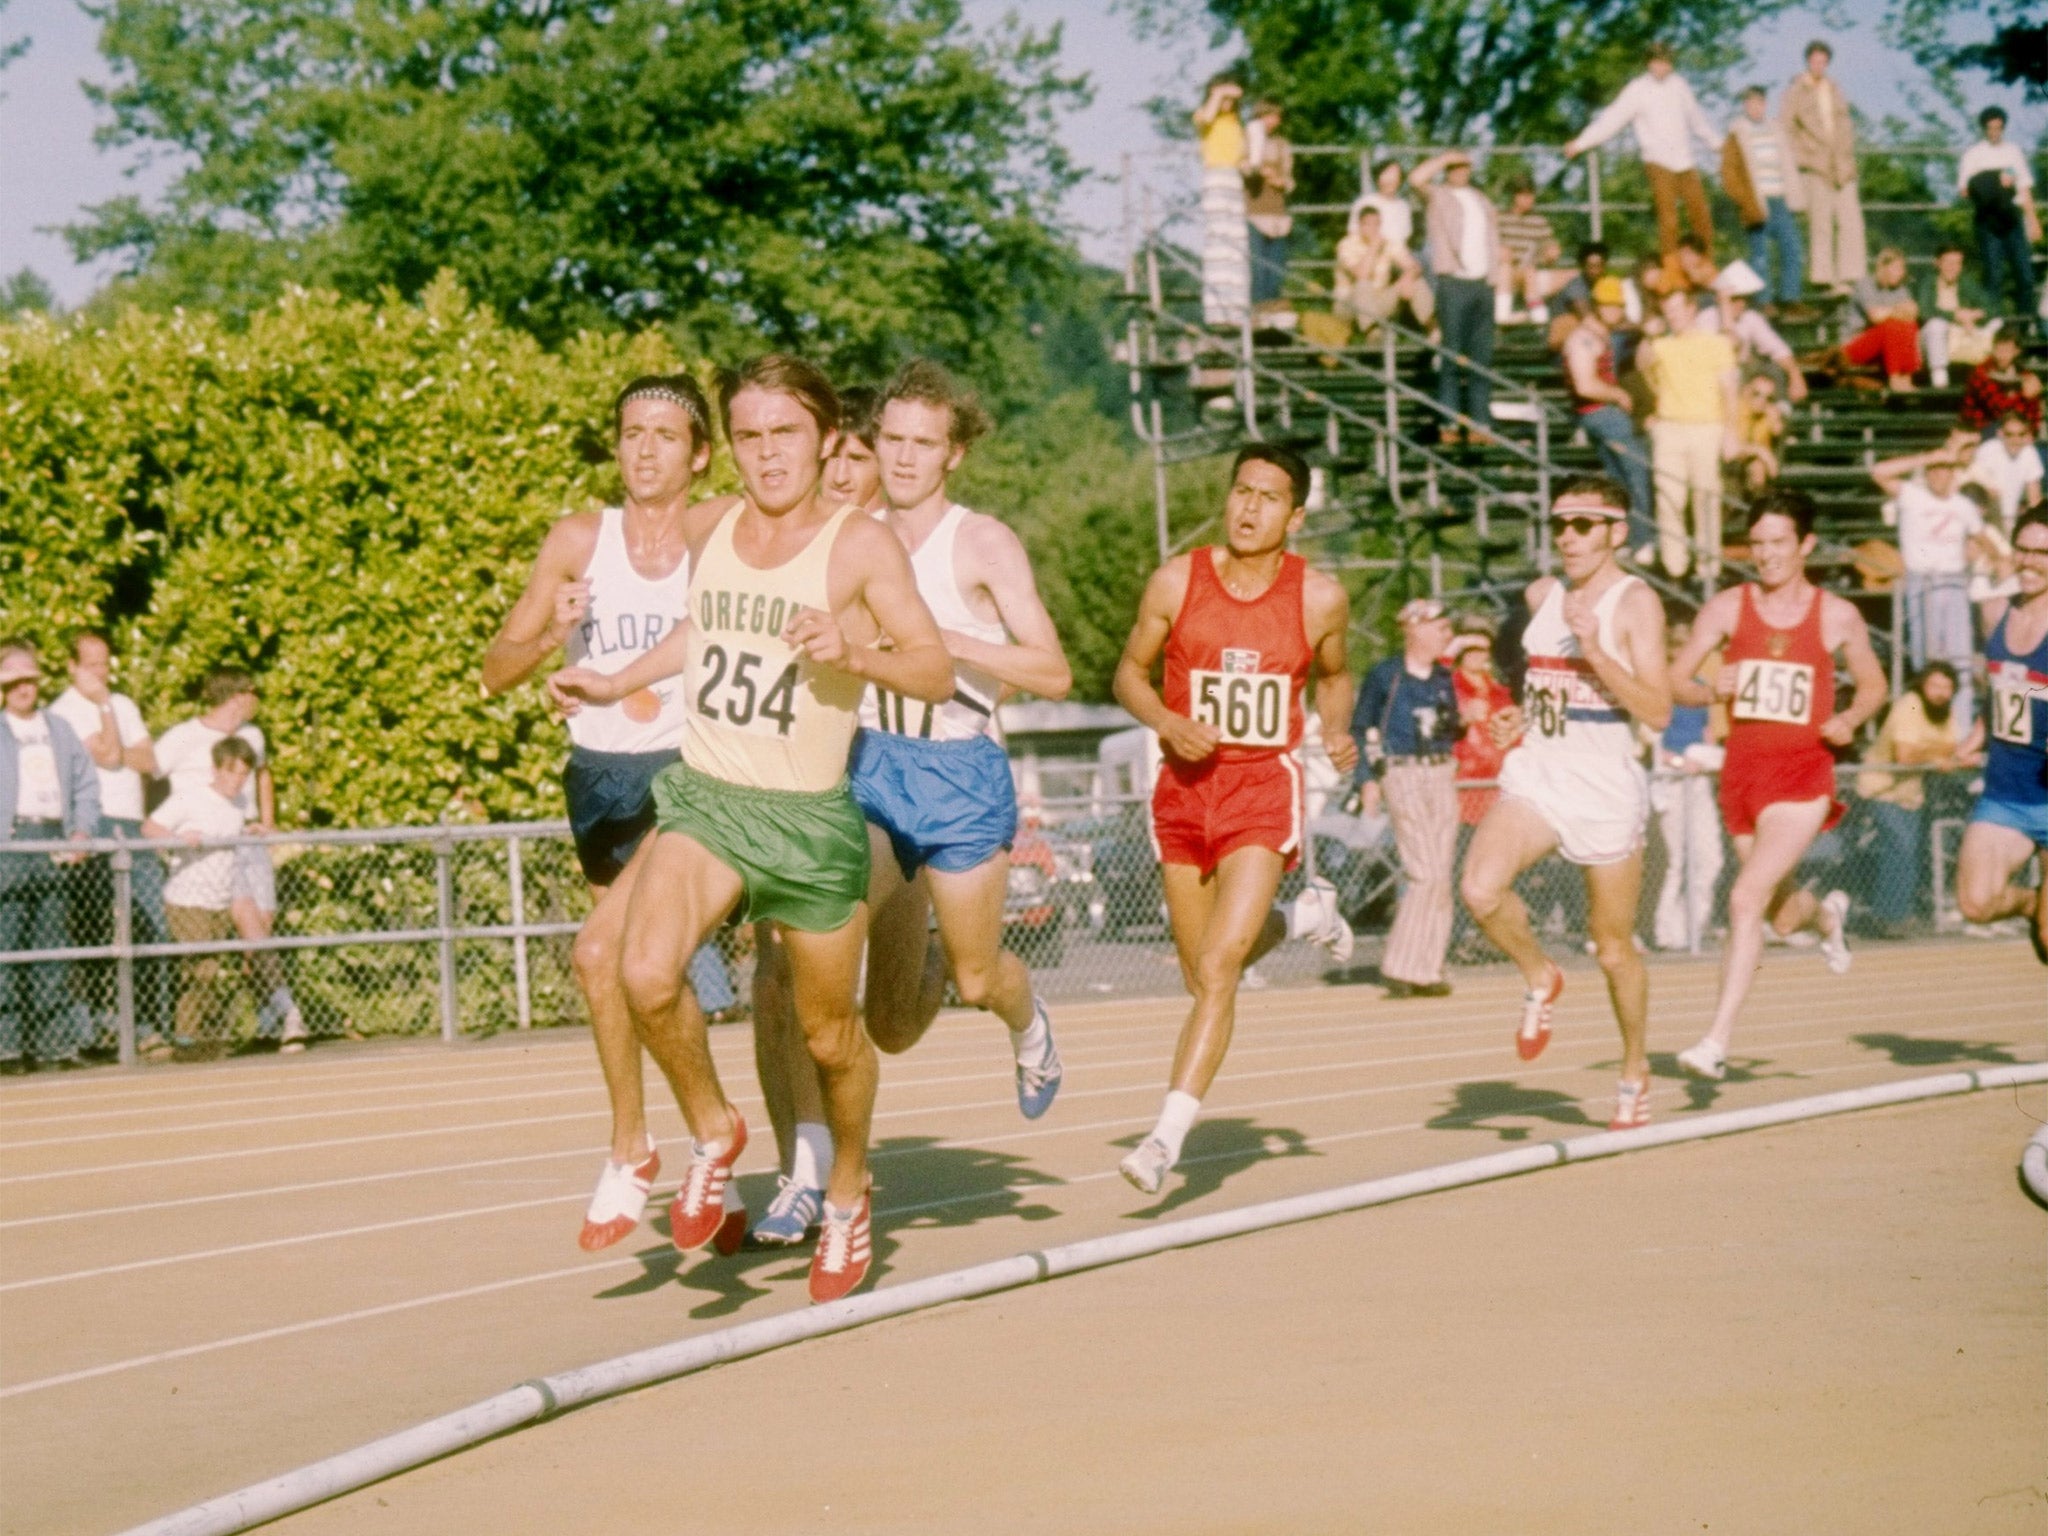 American athlete Steve Prefontaine in action during a meet in Eugene, Oregon. The runner was killed in a car accident outside the town in 1975 (Getty)